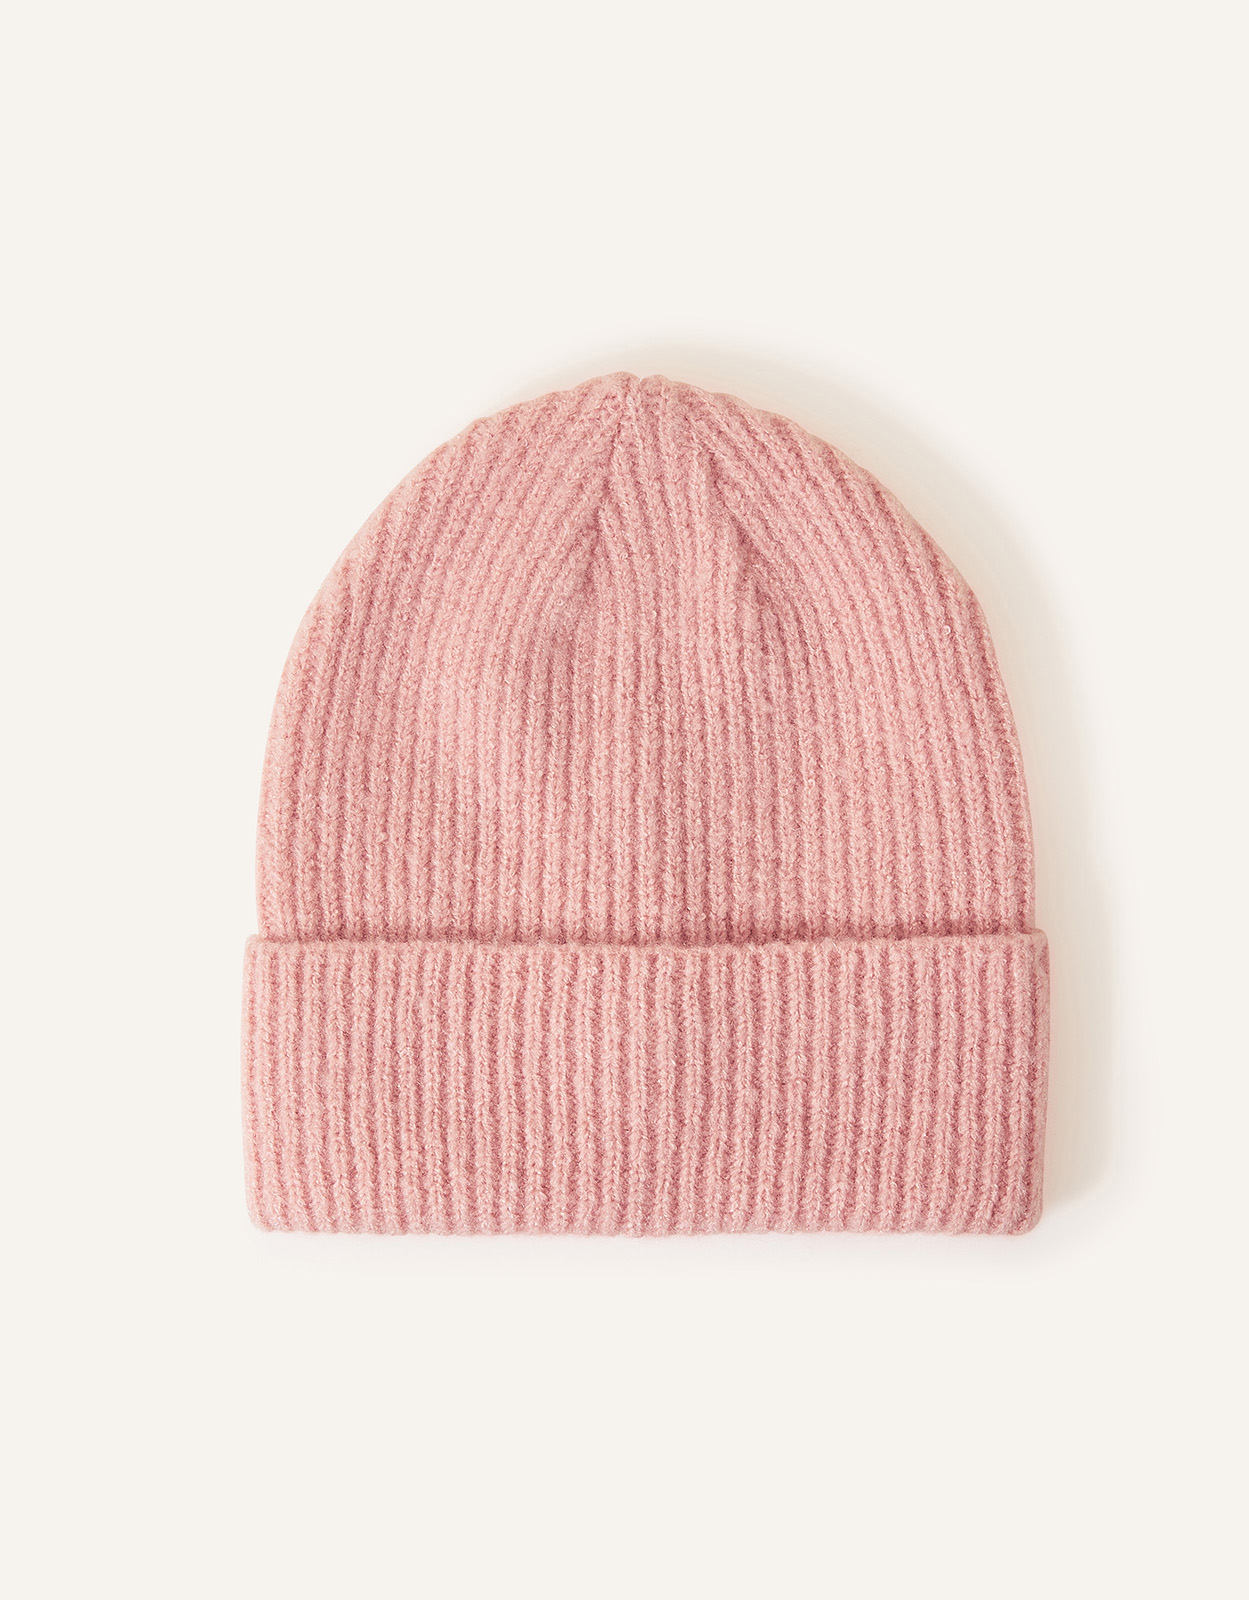 Accessorize Light Pink Classic Knitted Acrylic Soho Beanie Hat, Size: 22x8cm